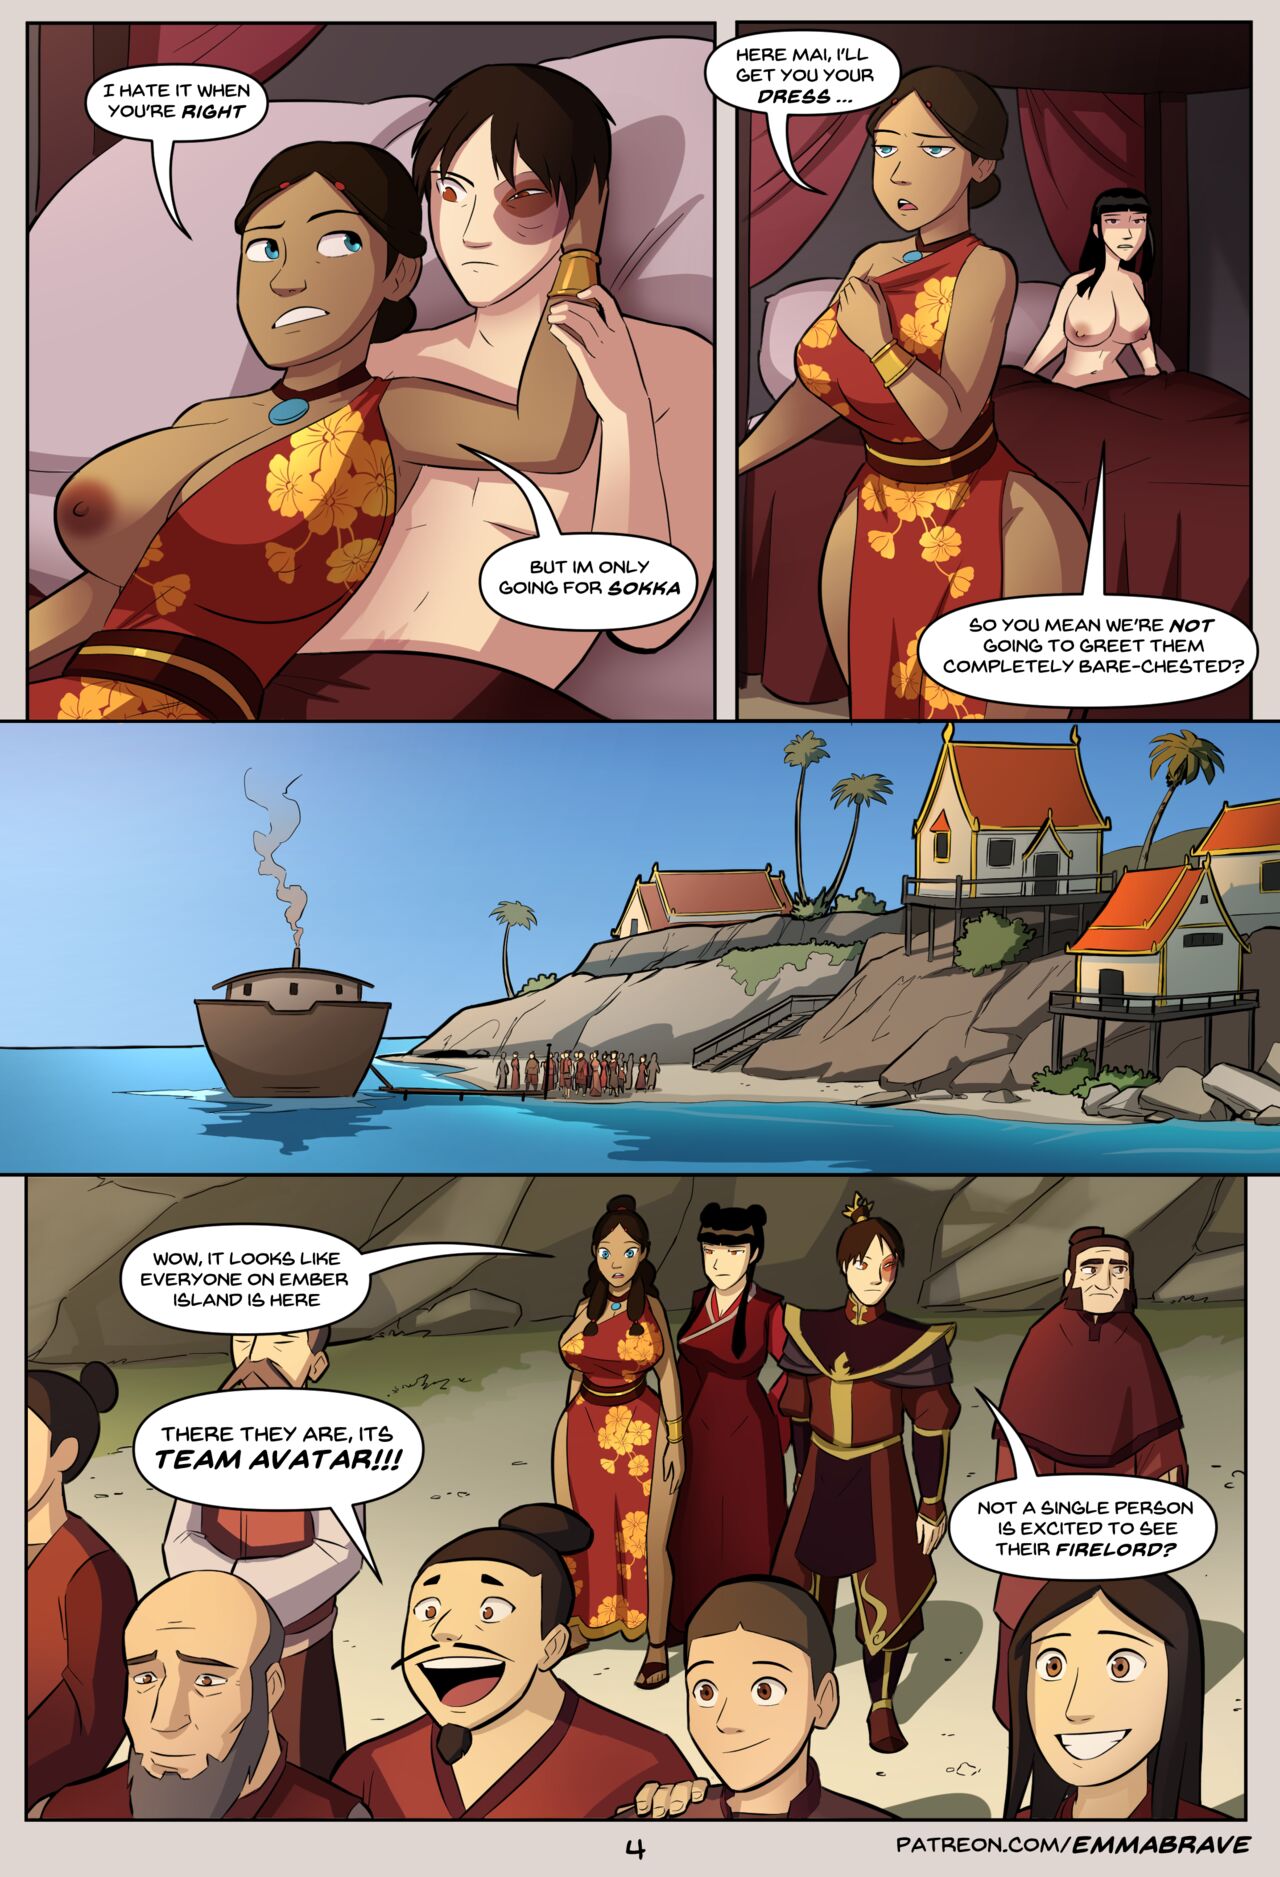 Avatar Porn Comic Strips - After Avatar #4 by EmmaBrave - FreeAdultComix